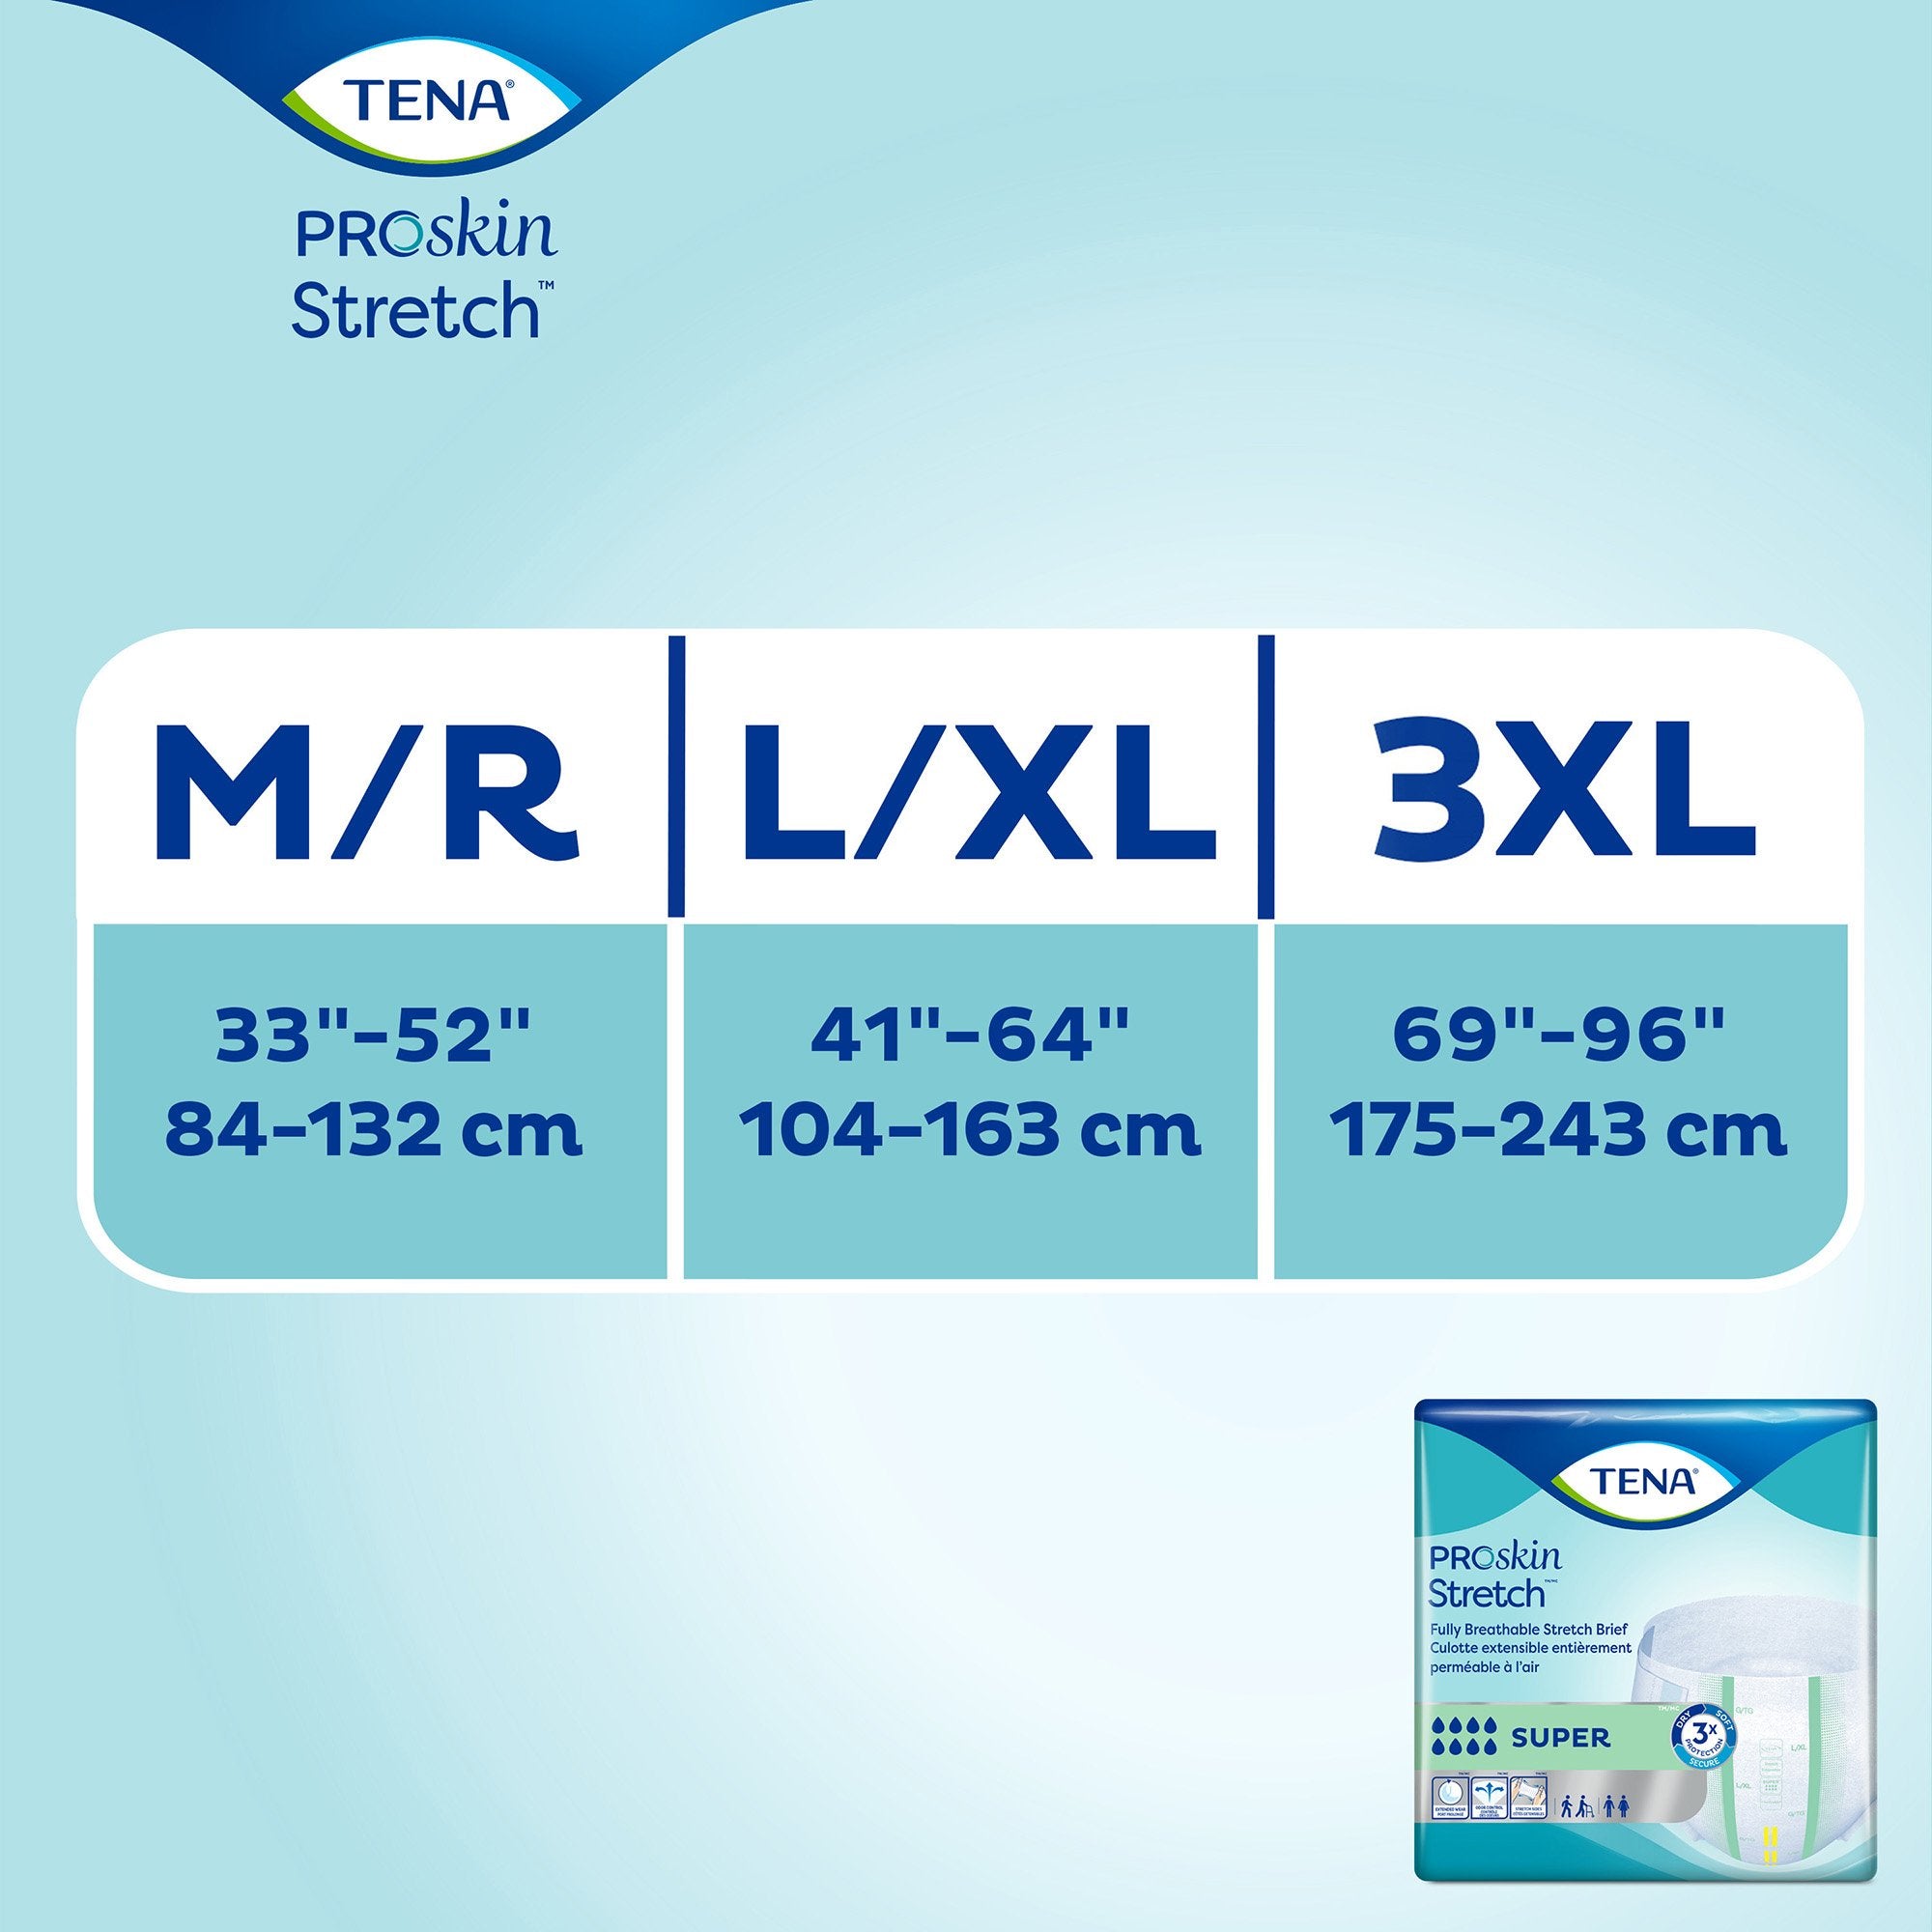 Unisex Adult Incontinence Brief TENA ProSkin Stretch Super Large / X-Large Disposable Heavy Absorbency